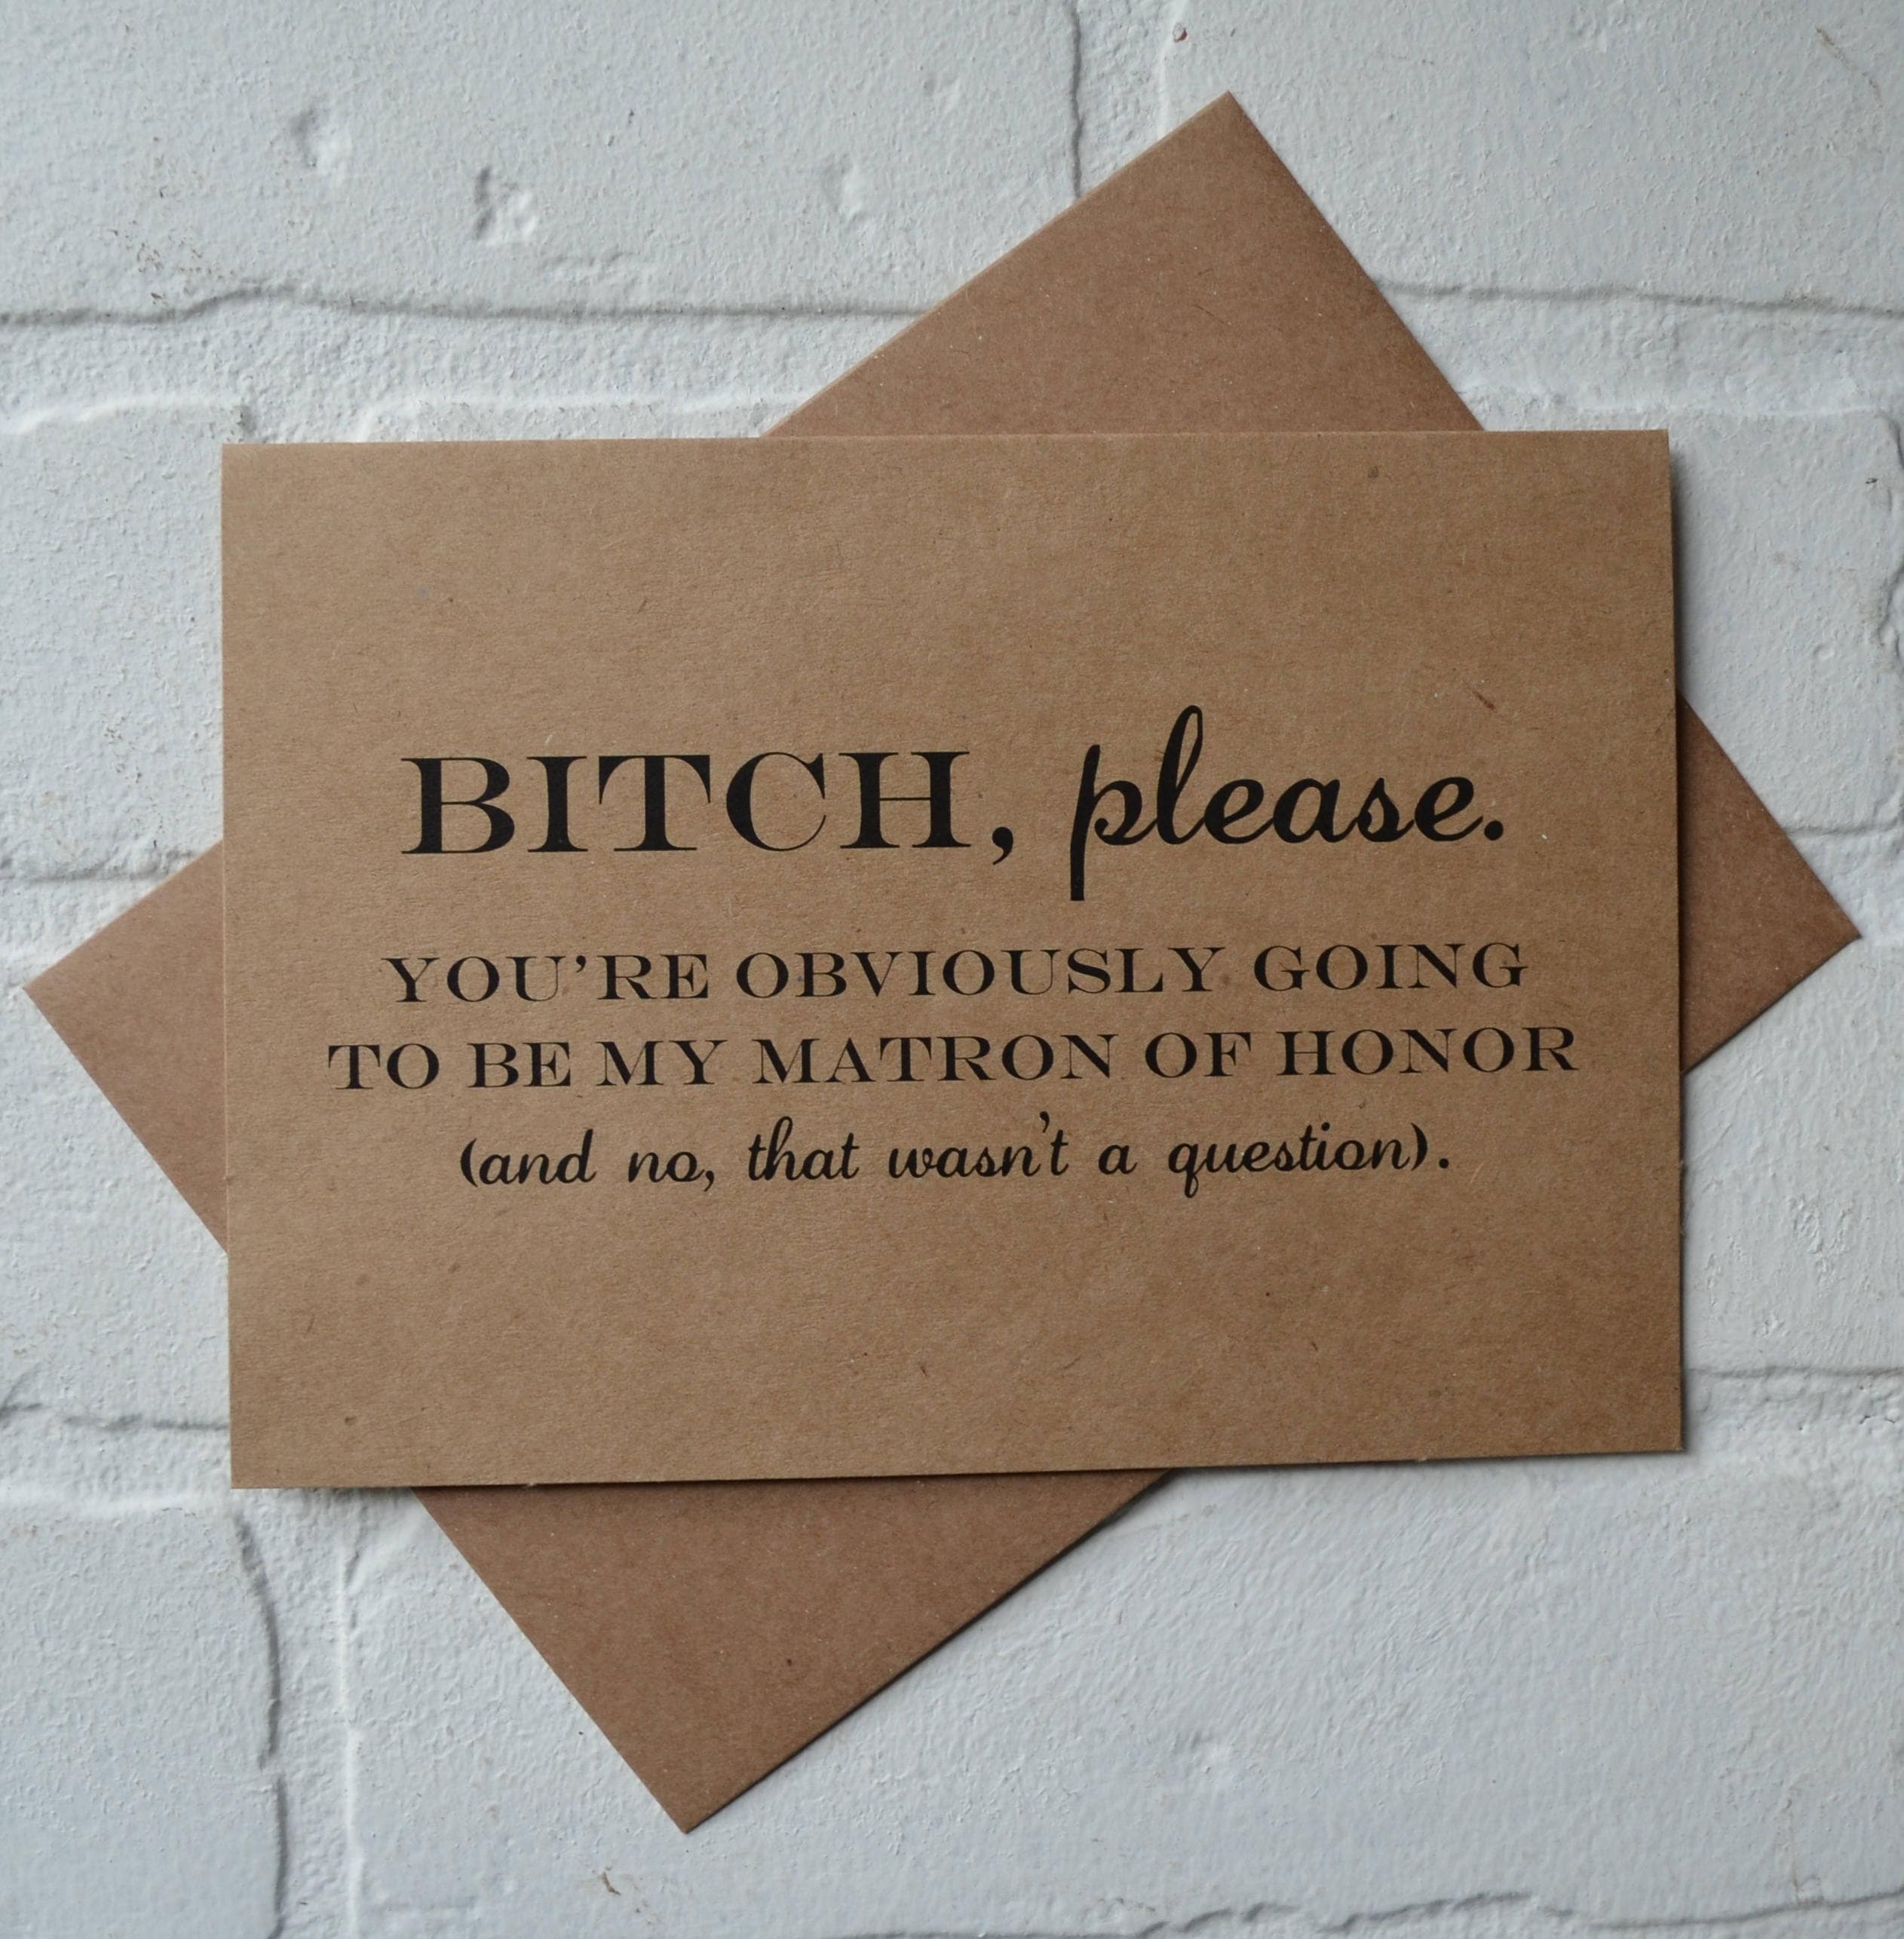 btch-please-will-you-be-my-maid-of-honor-card-bridesmaid-card-etsy